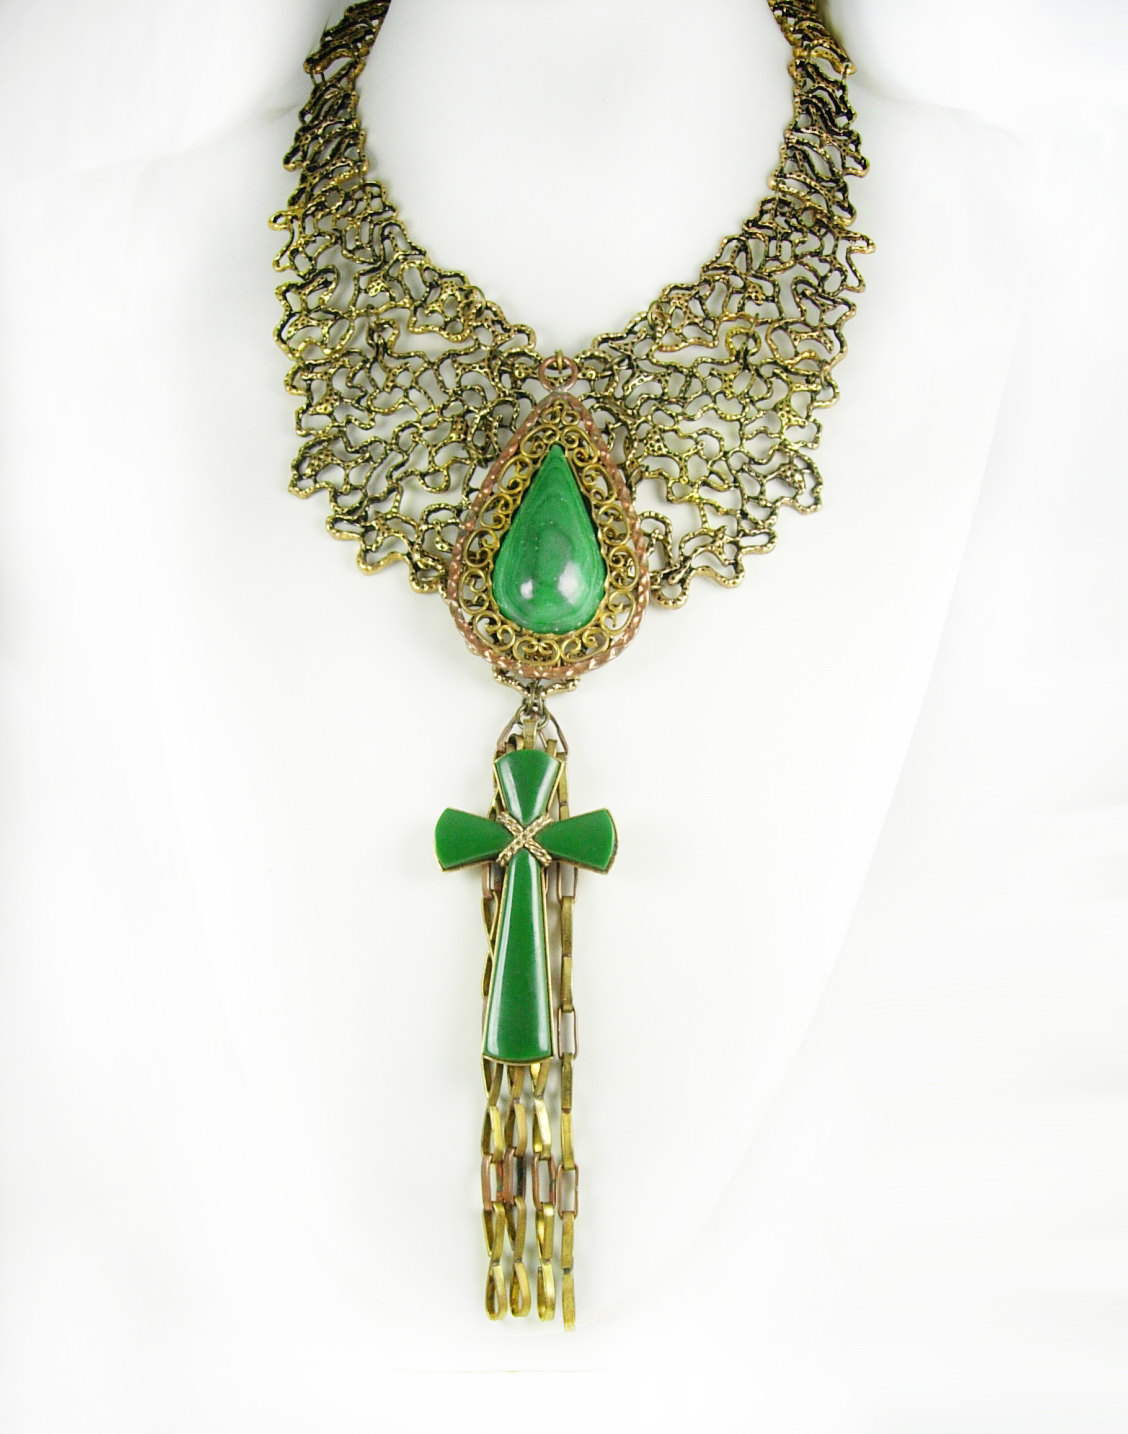 Statement necklace Malachite cross with huge tassels Dramatic - $245.00